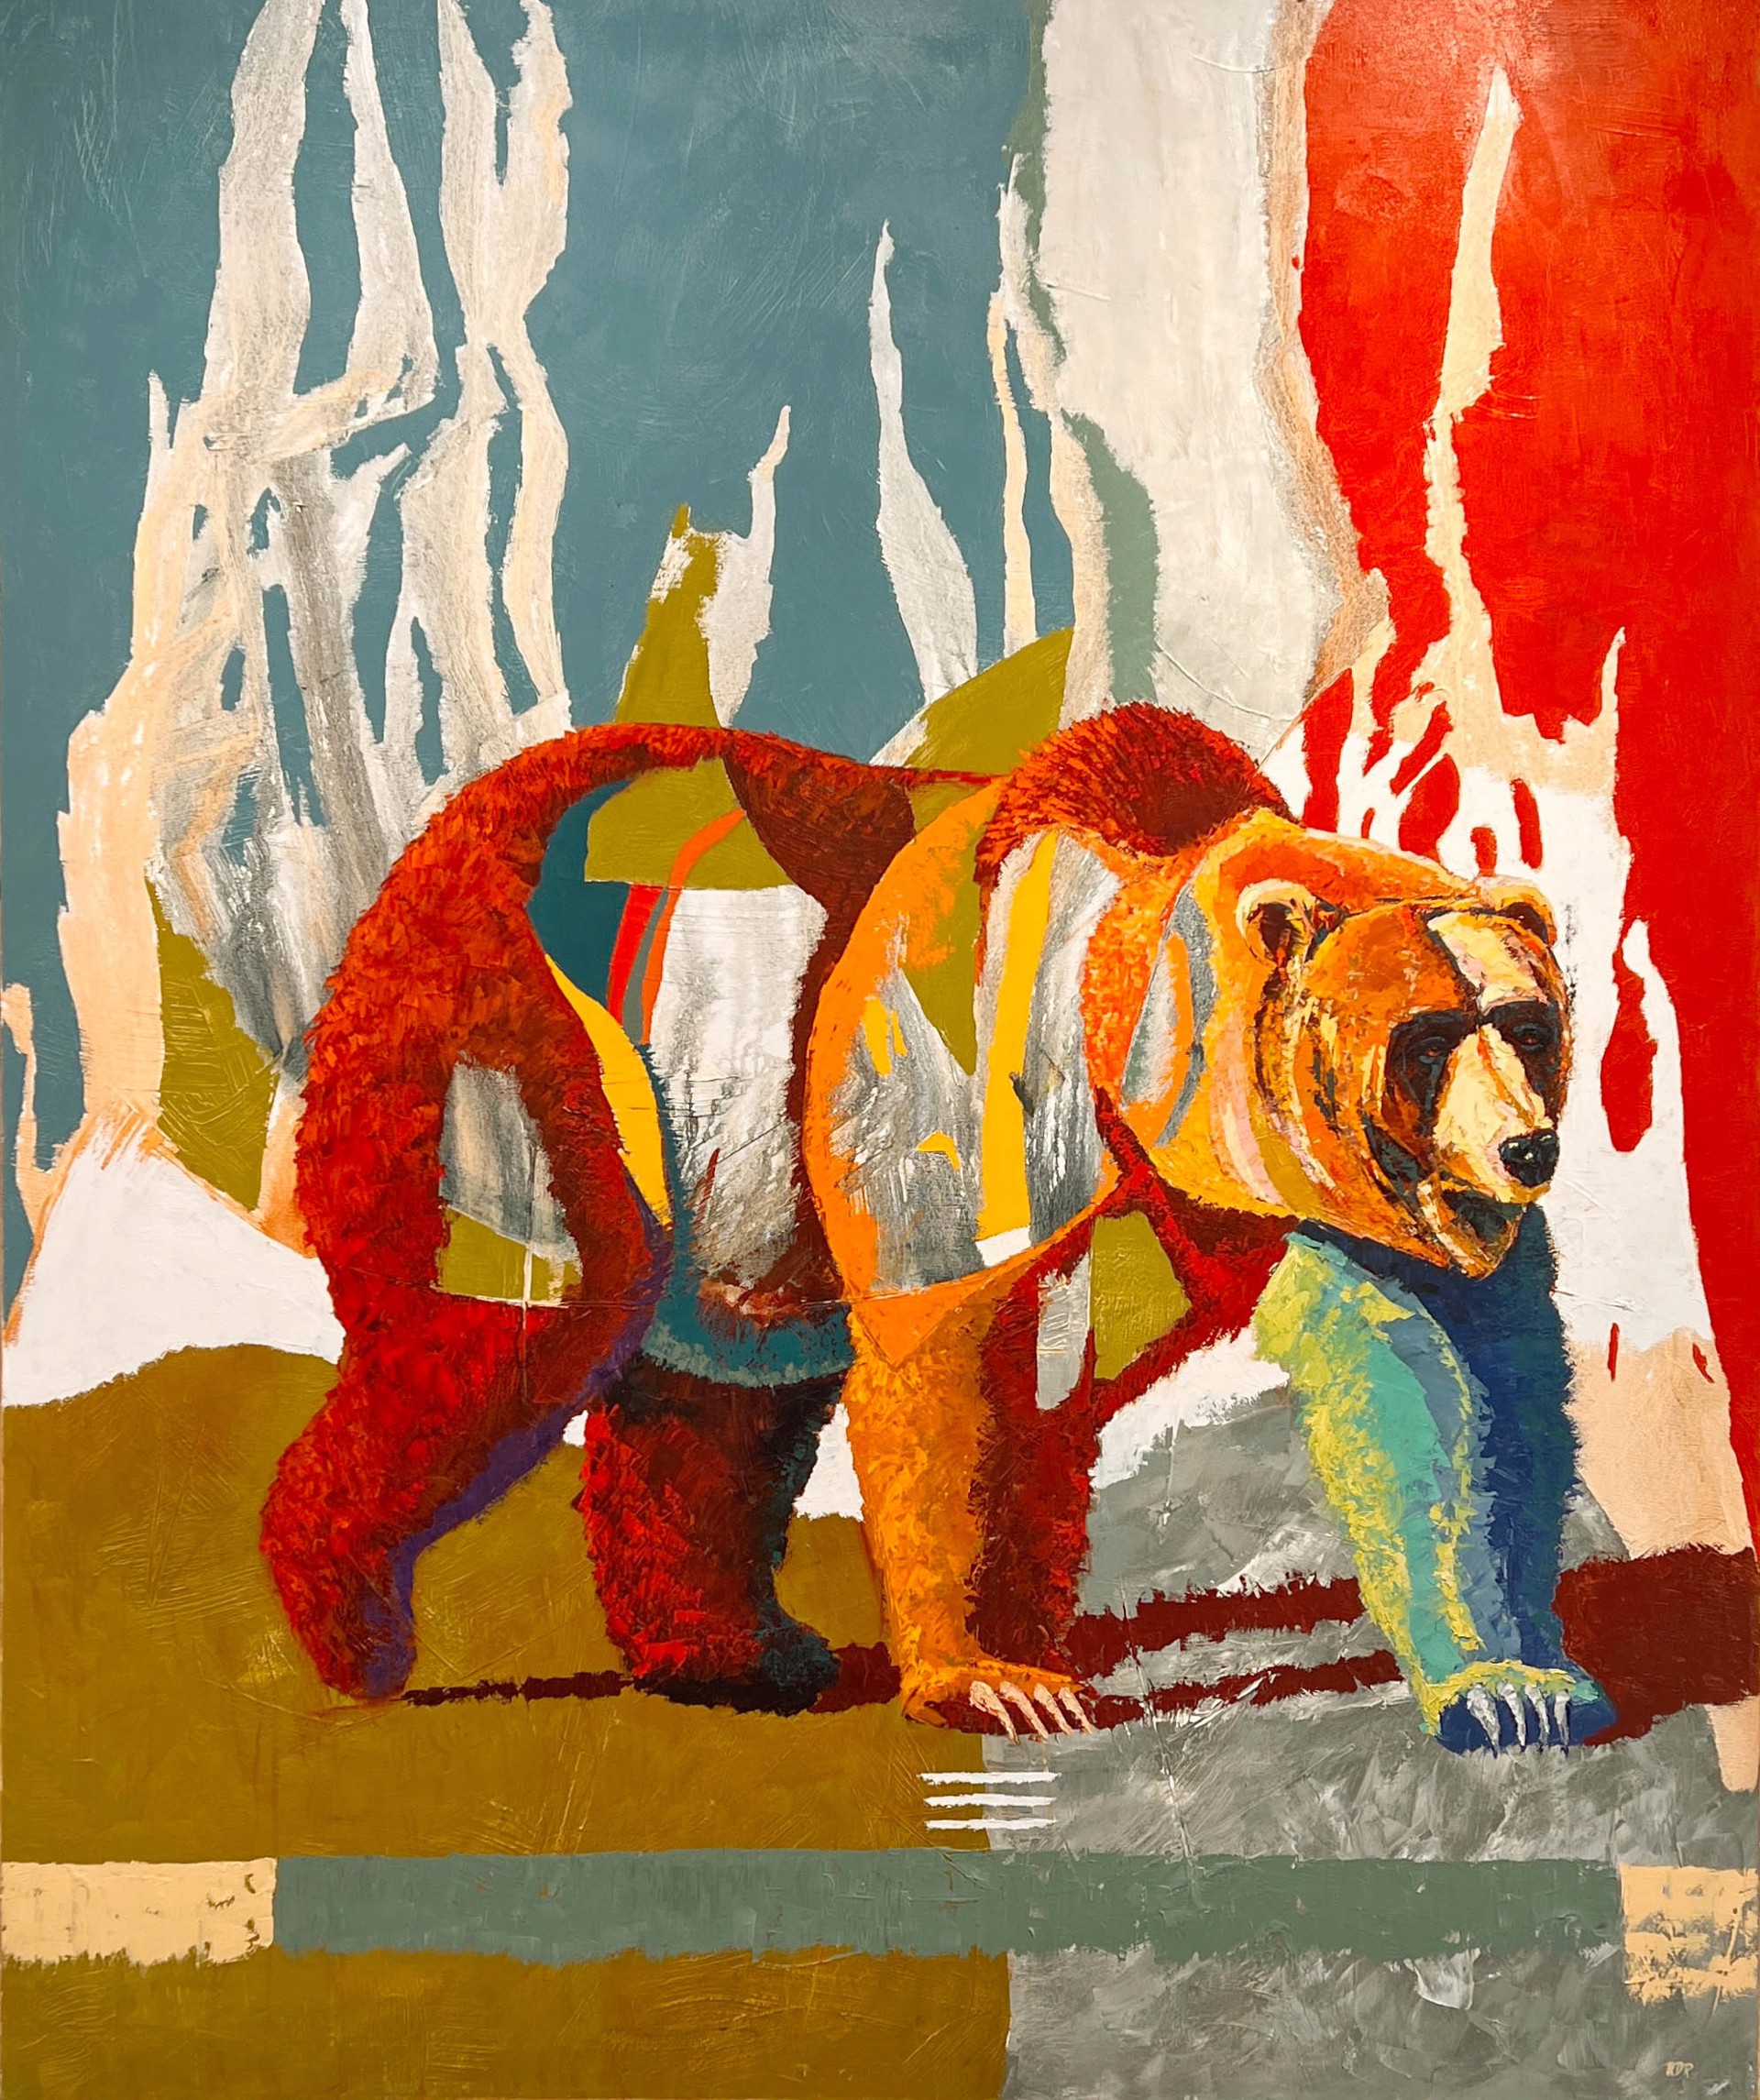 Original Oil Painting Featuring A Walking Grizzly Bear In A Color Block Graphic Style